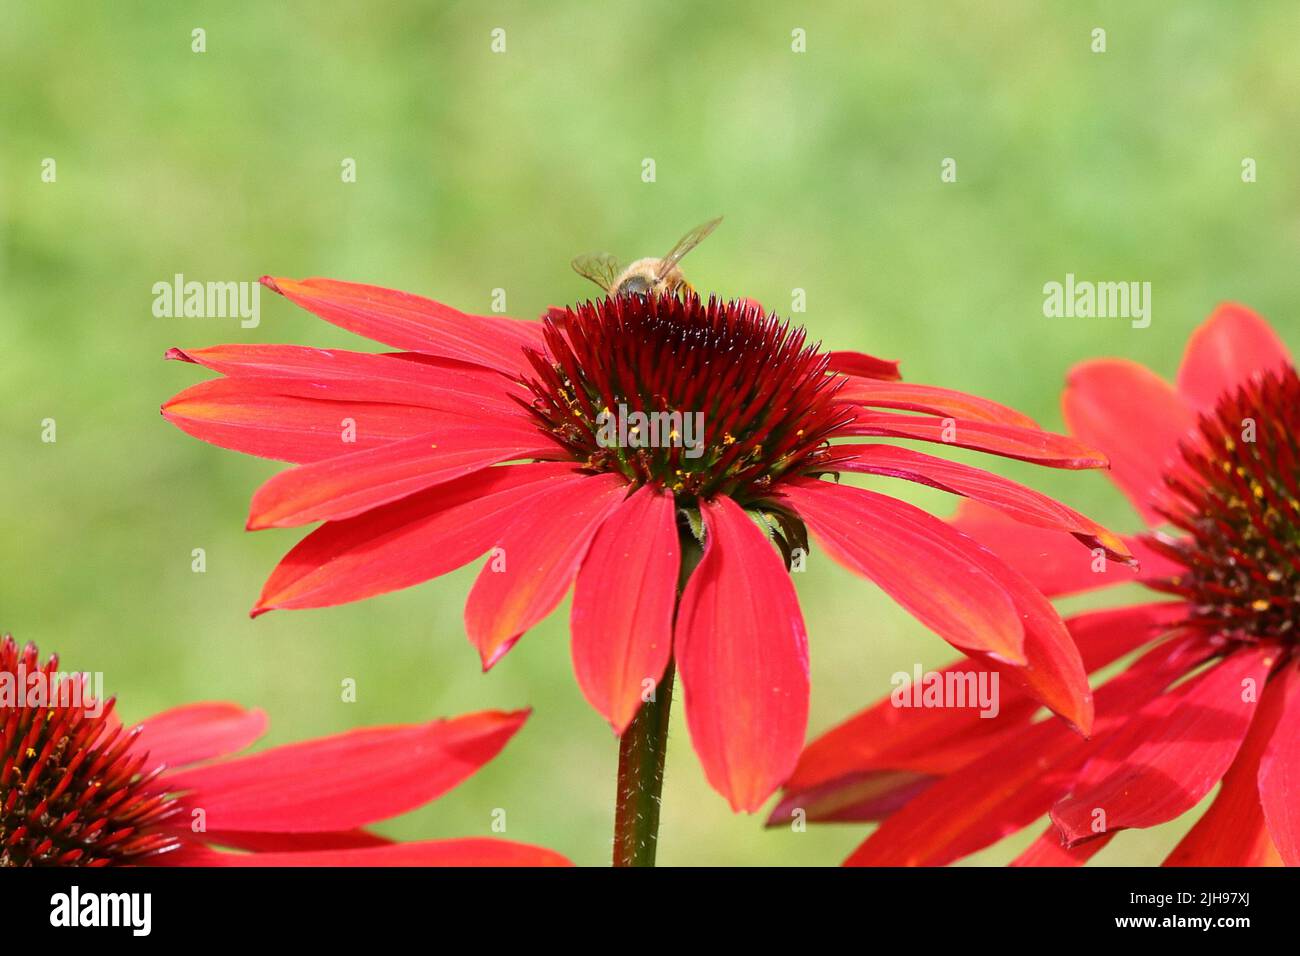 close-up of a red echinacea purpurea against a blurry background, copy space Stock Photo